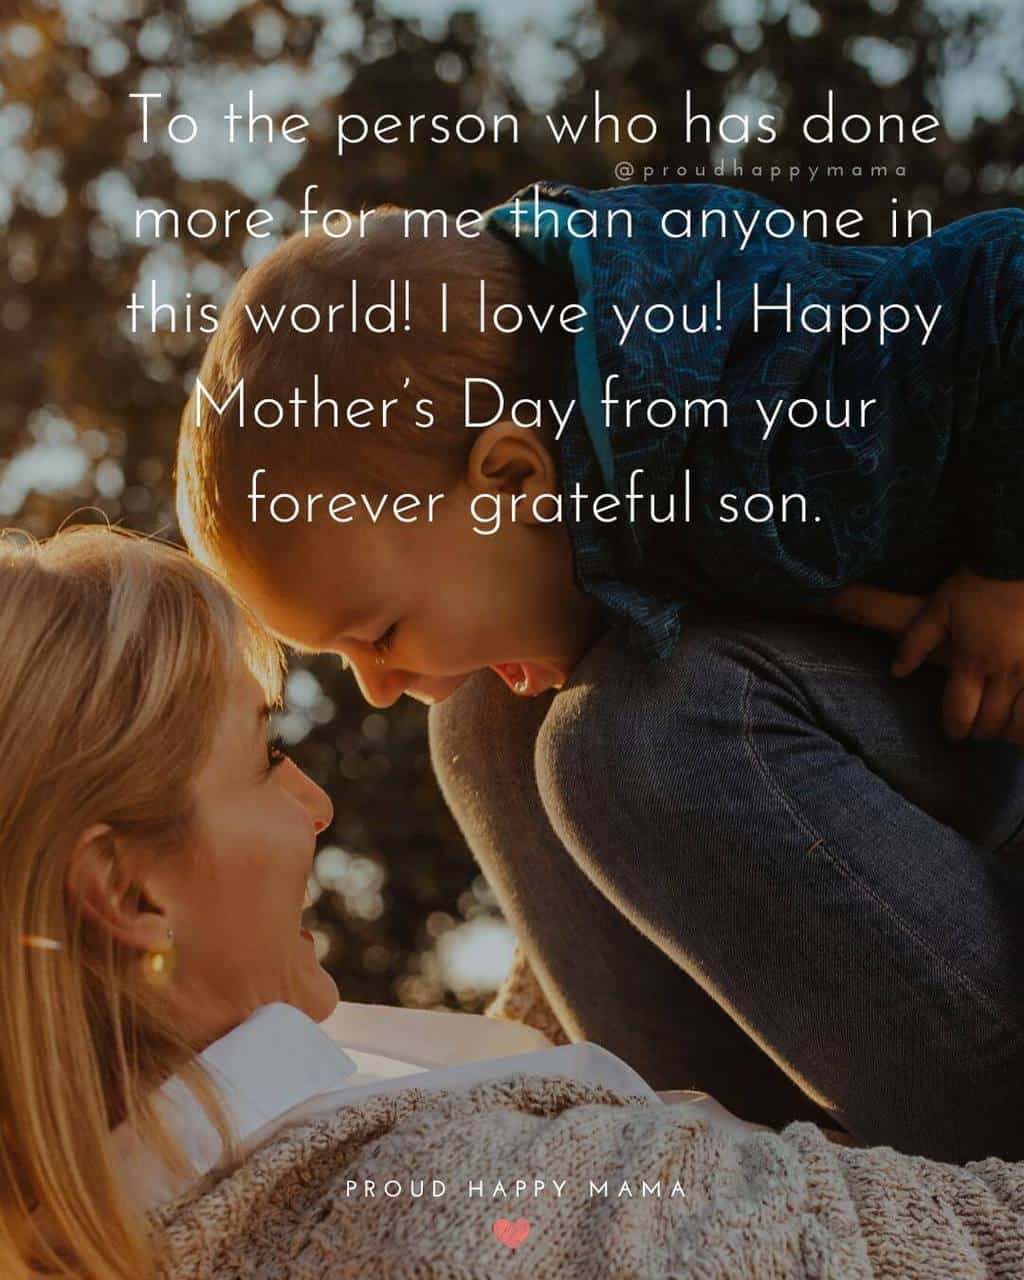 Mother Son Sayings | To the person who has done more for me than anyone in this world! I love you! Happy Mother’s Day from your forever grateful son.